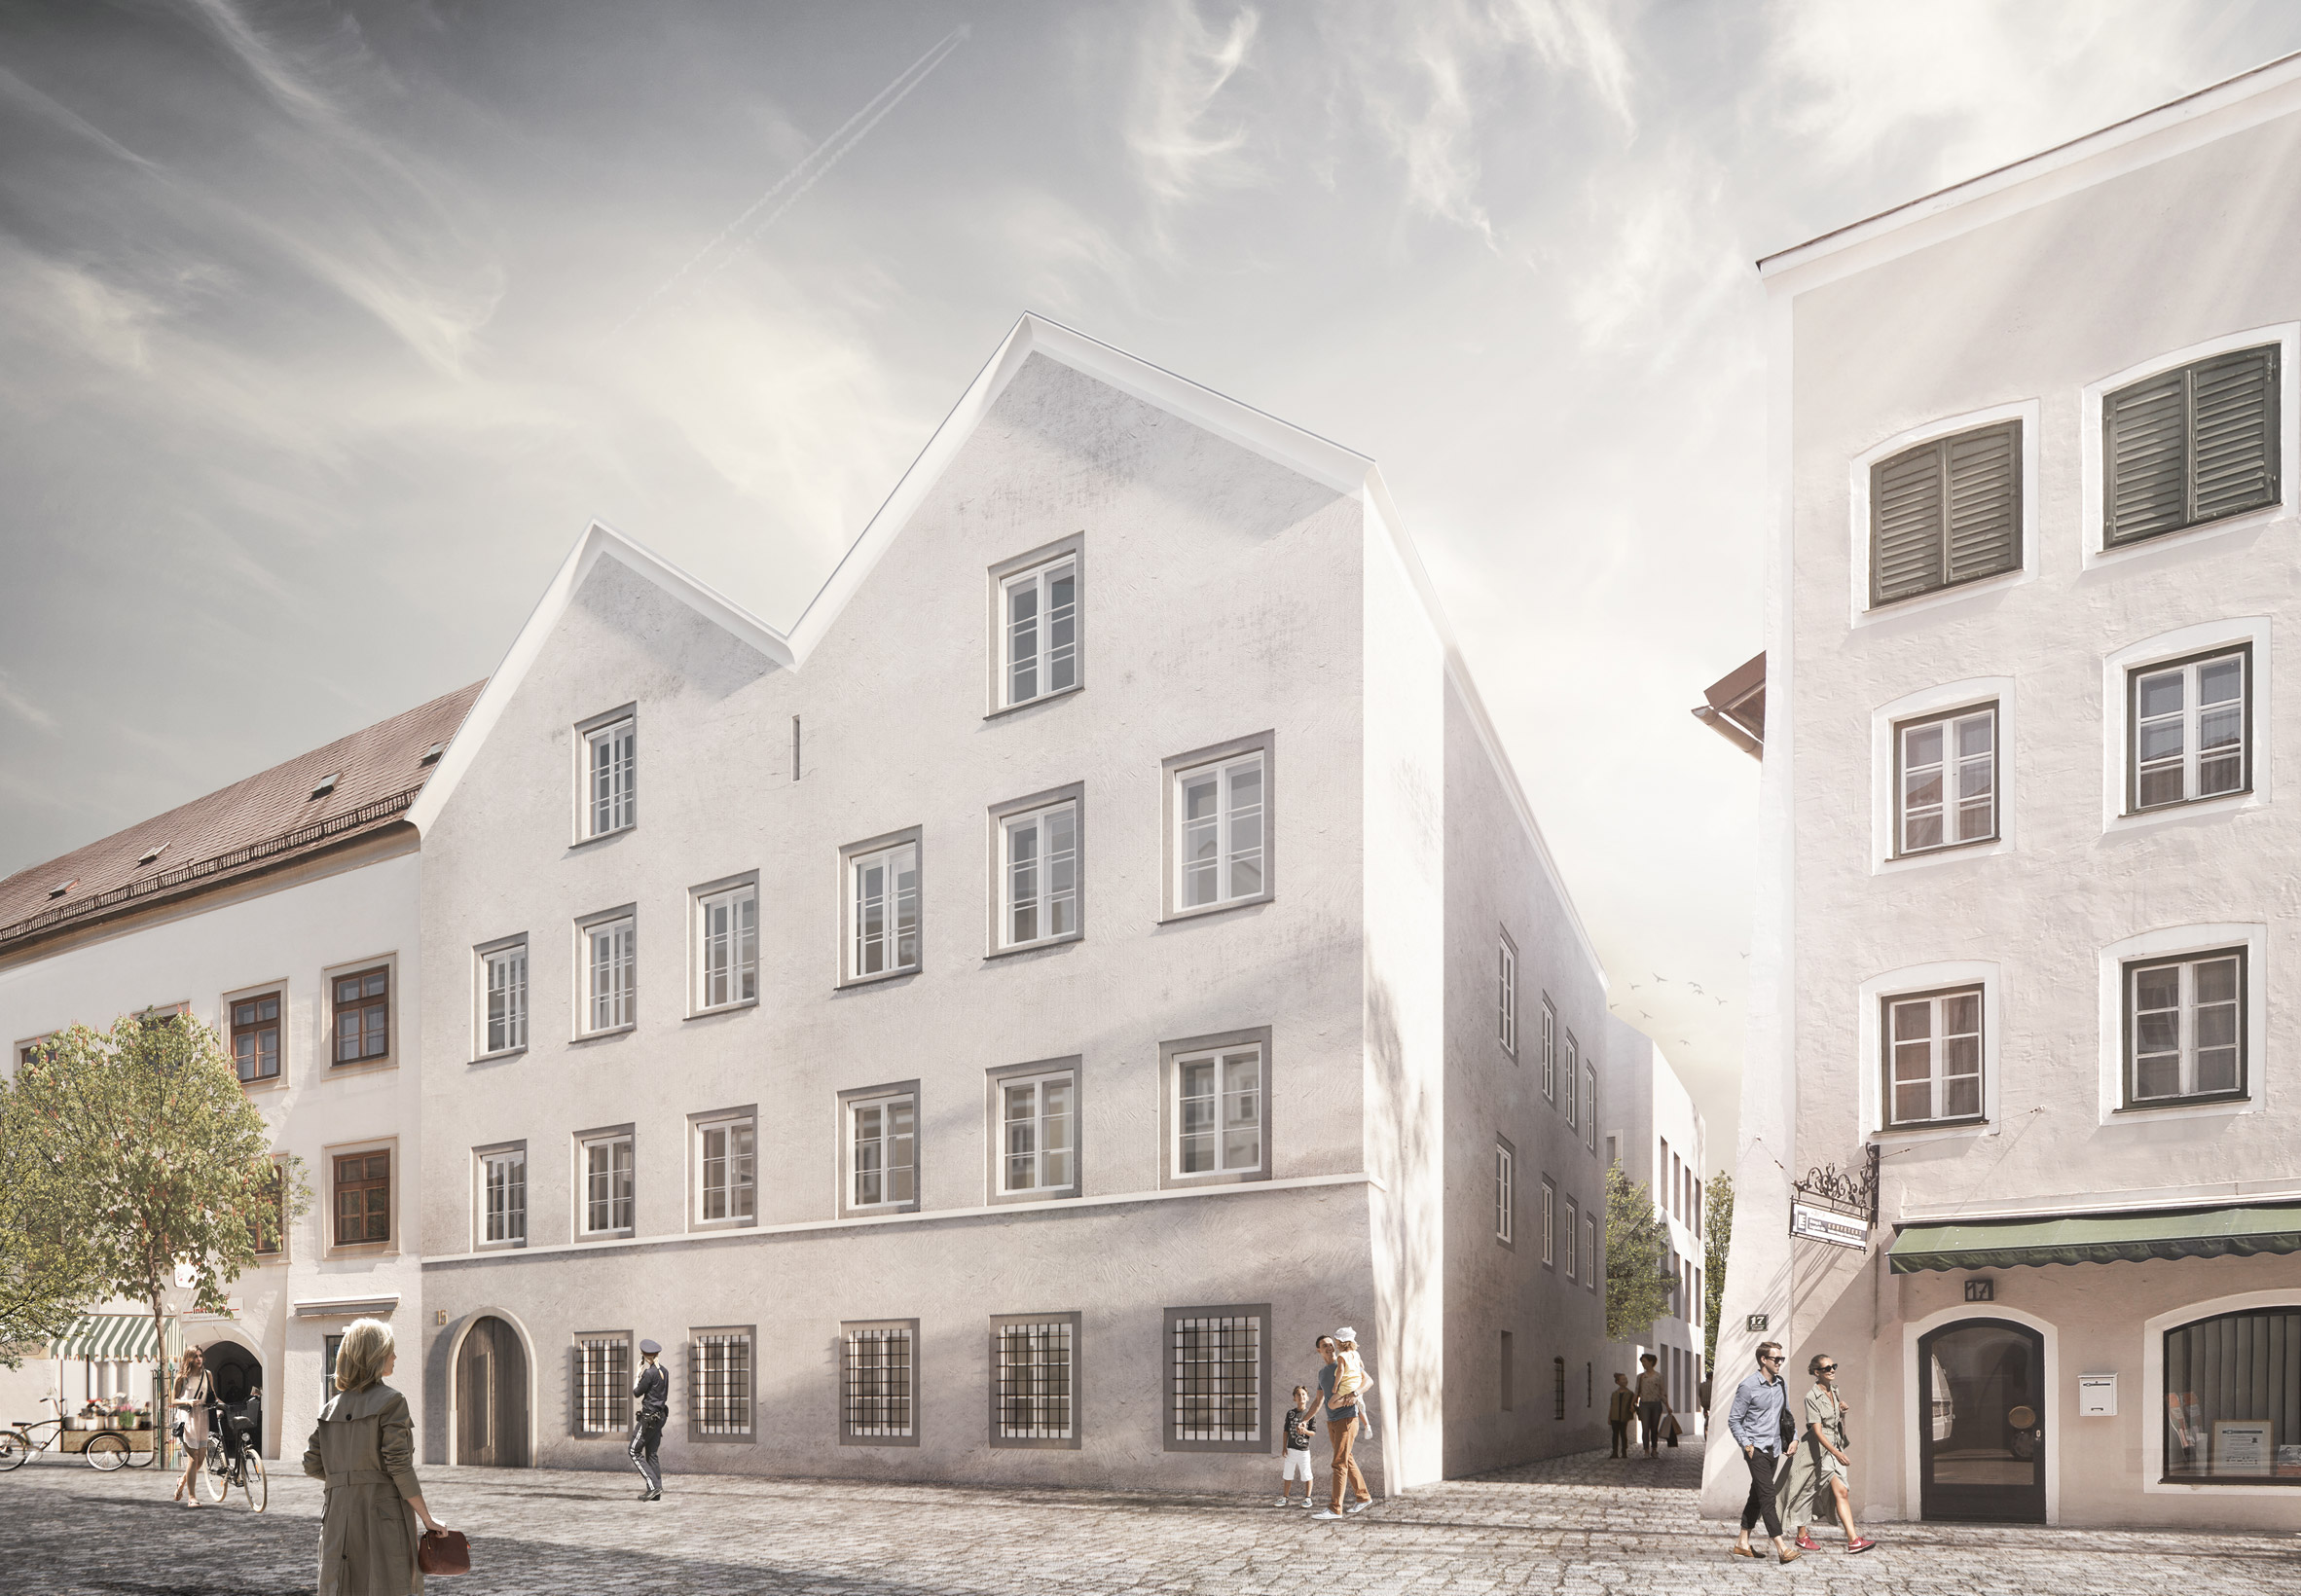 Marte.Marte Architects unveils plans to convert Hitler's house into police station